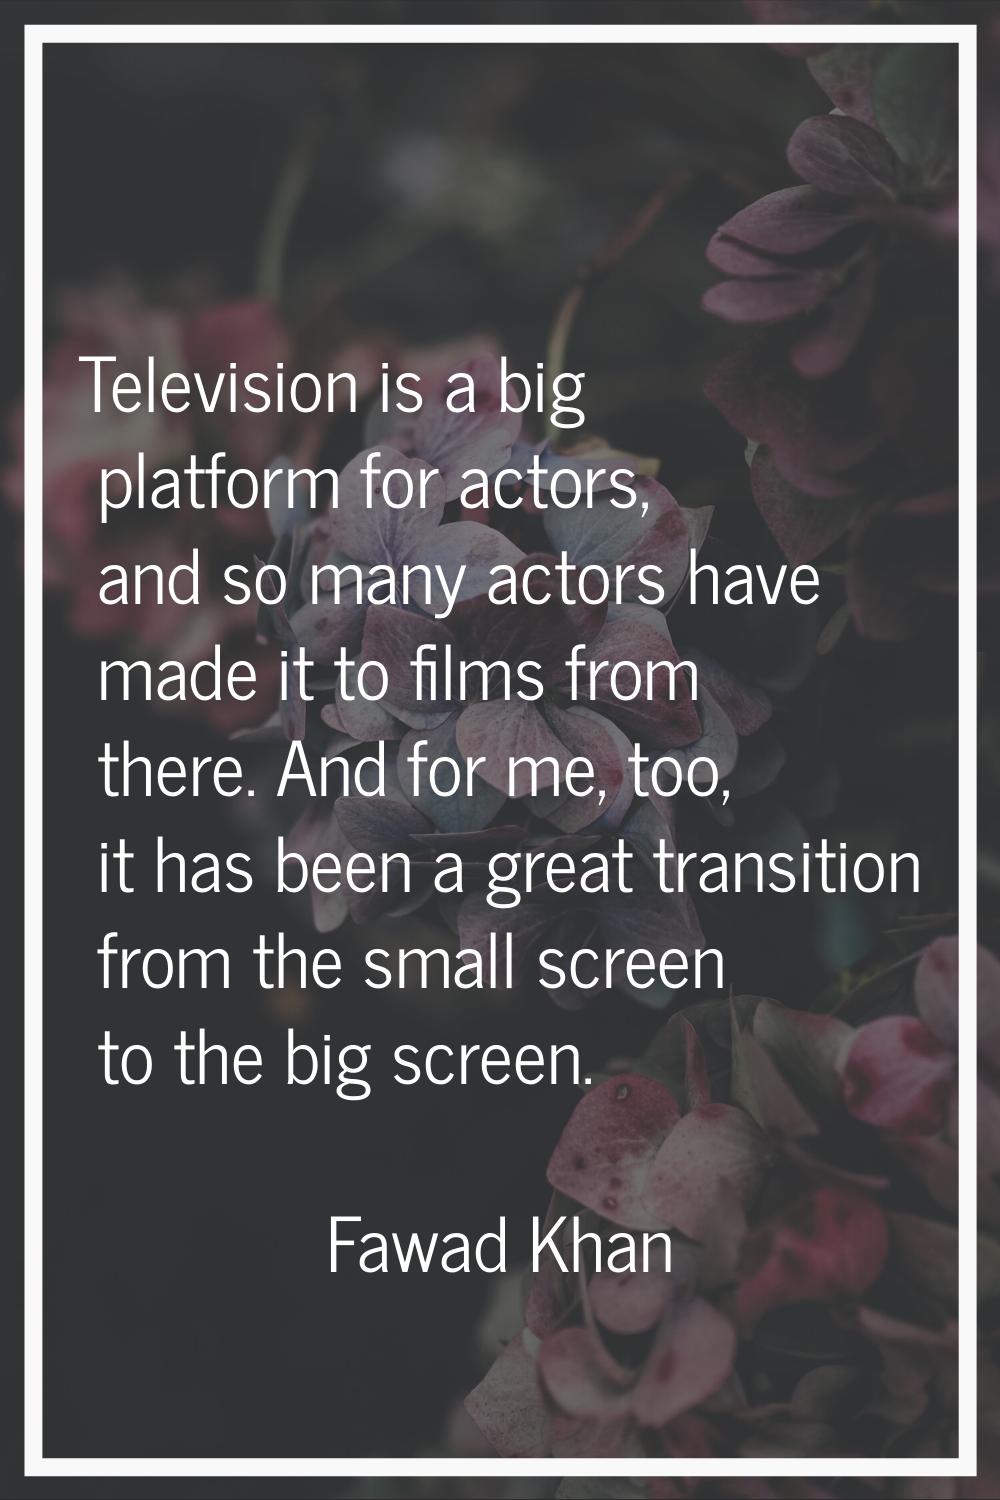 Television is a big platform for actors, and so many actors have made it to films from there. And f